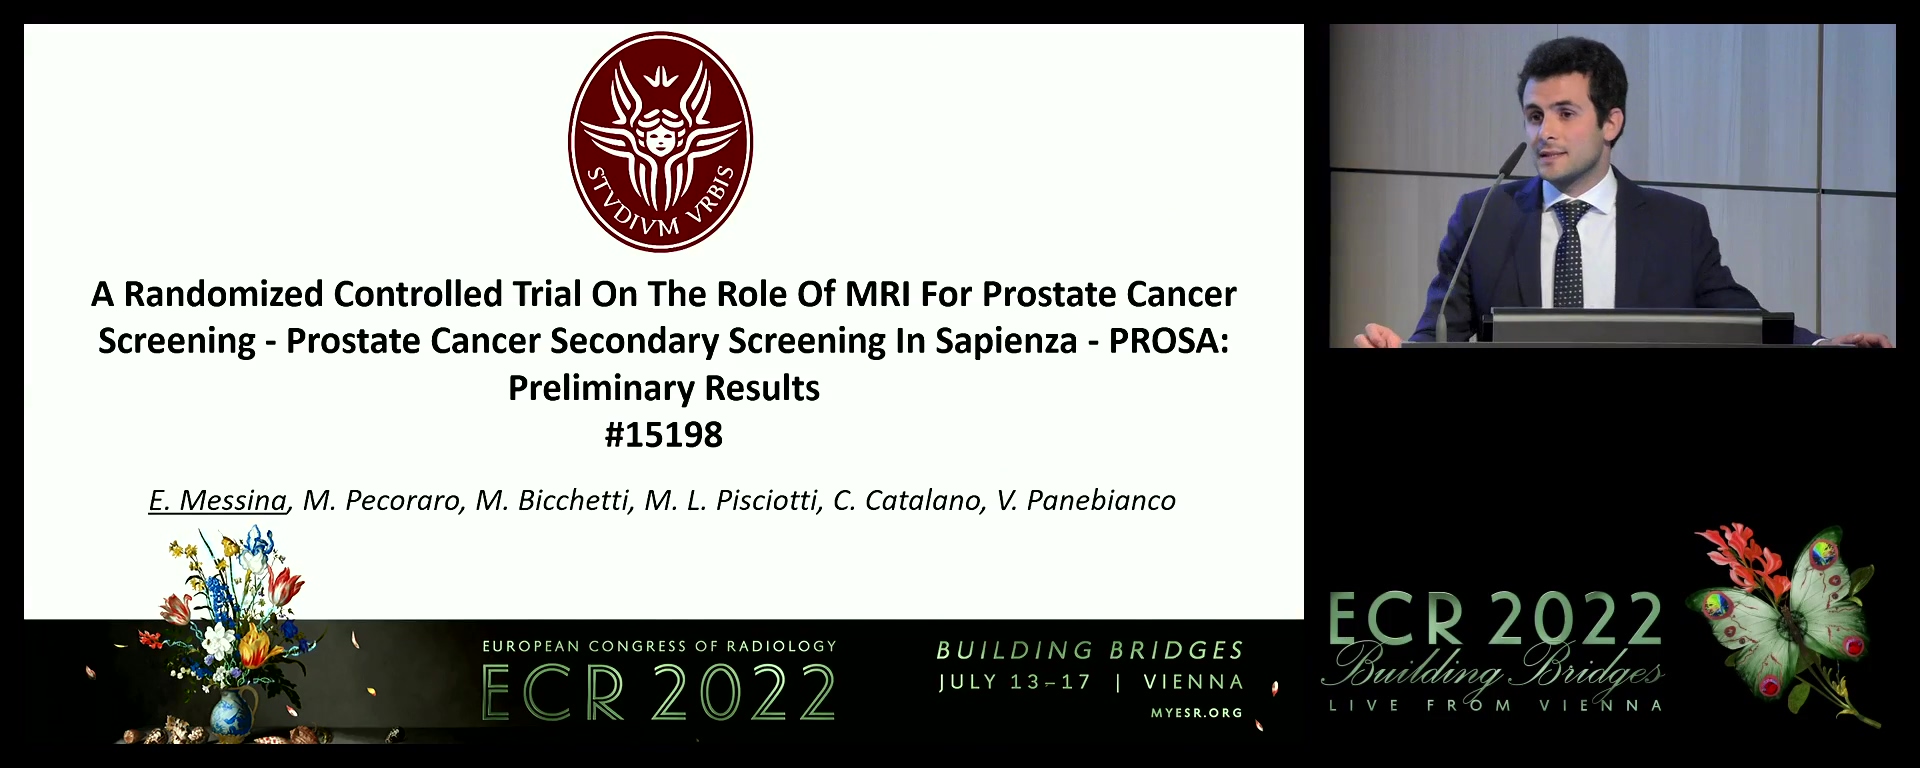 A randomised controlled trial on the role of MRI for prostate cancer screening: prostate cancer secondary screening in Sapienza, PROSA preliminary results